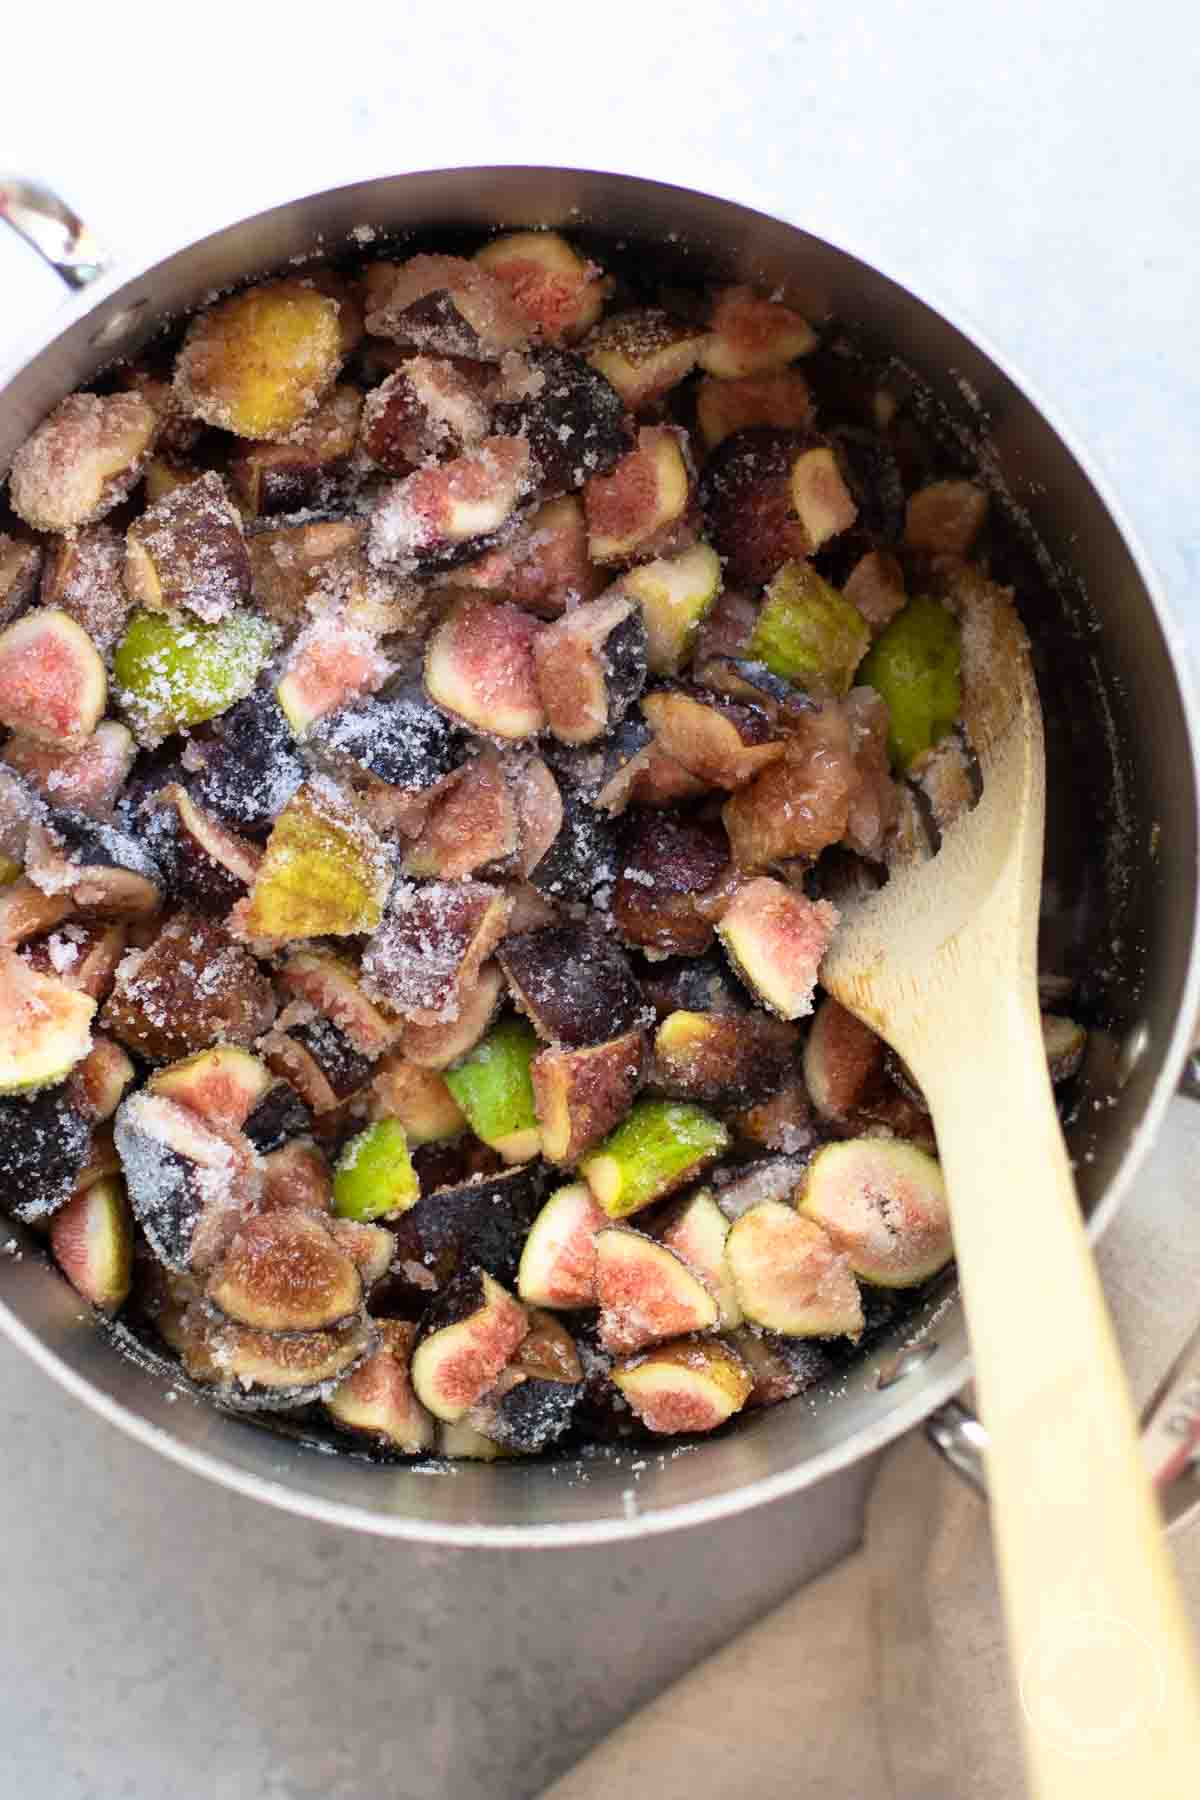 Cut figs of many colors with sugar sprinkled on top in a stainless steel pot with a wooden spoon.